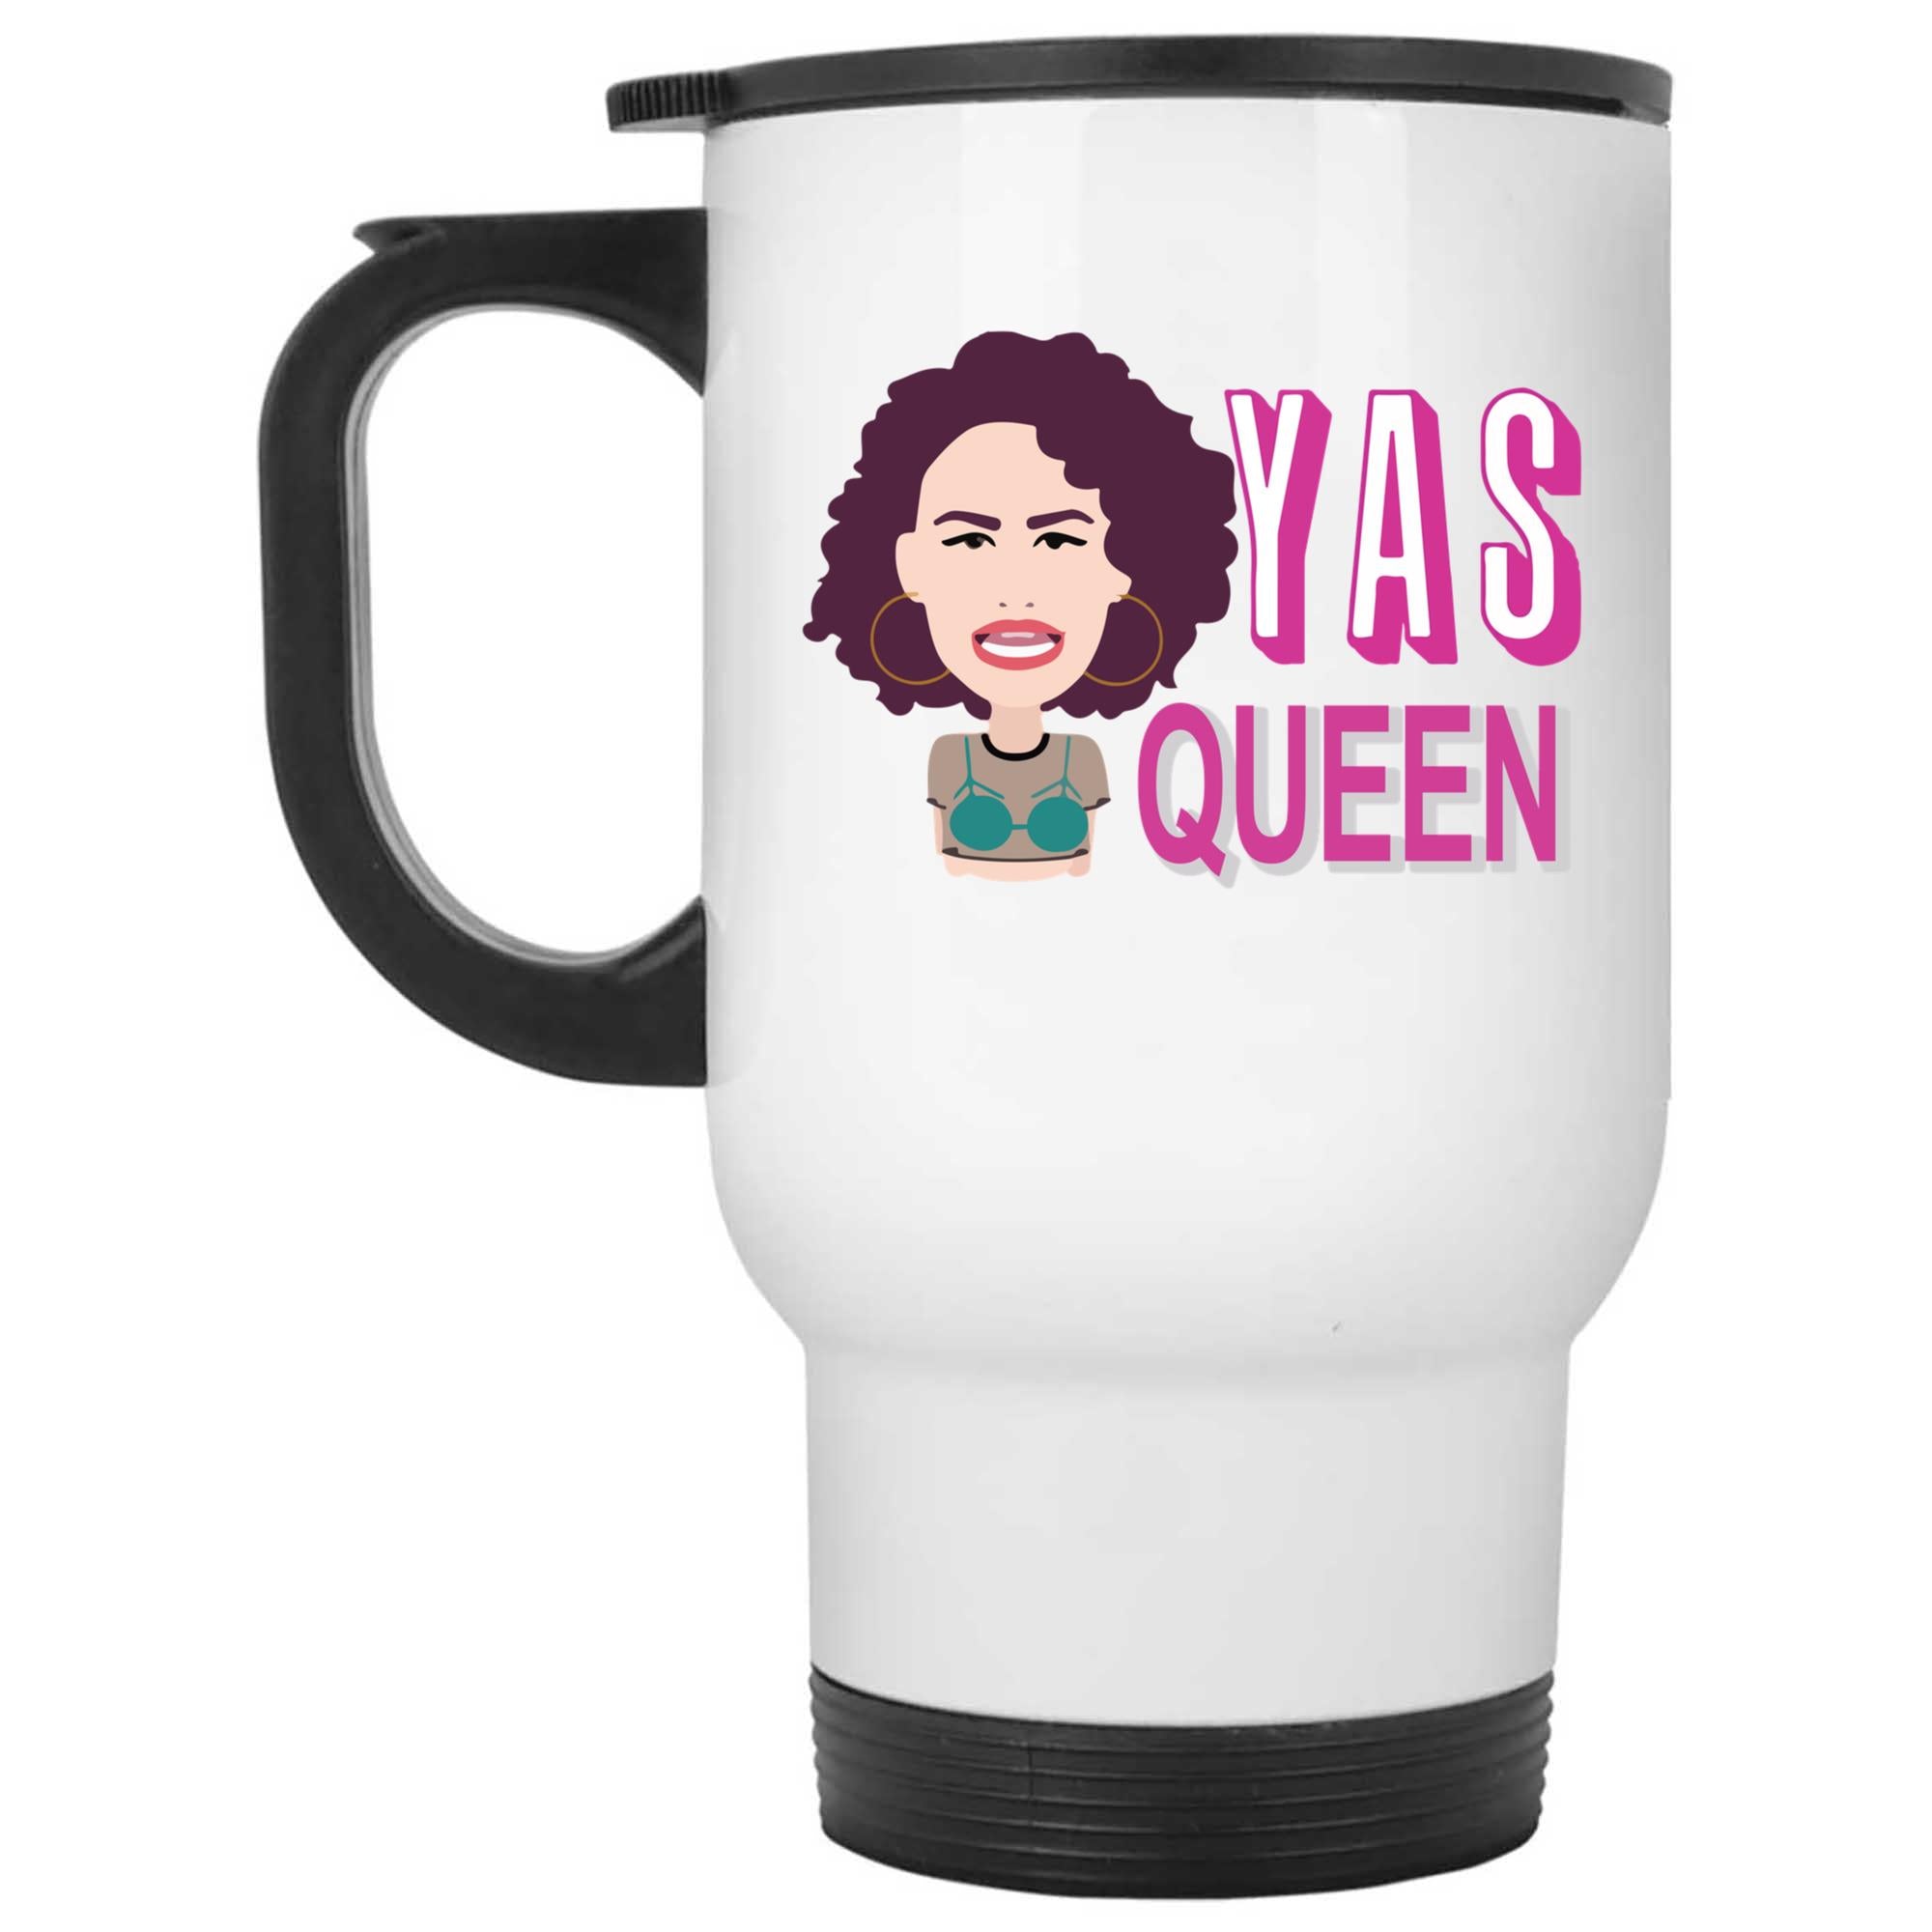 Skitongifts Funny Ceramic Coffee Mug For Birthday, Mother's Day, Father's Day, Christmas LH211221_Yasss Queen- Broad City Inspired Kzvwzdg